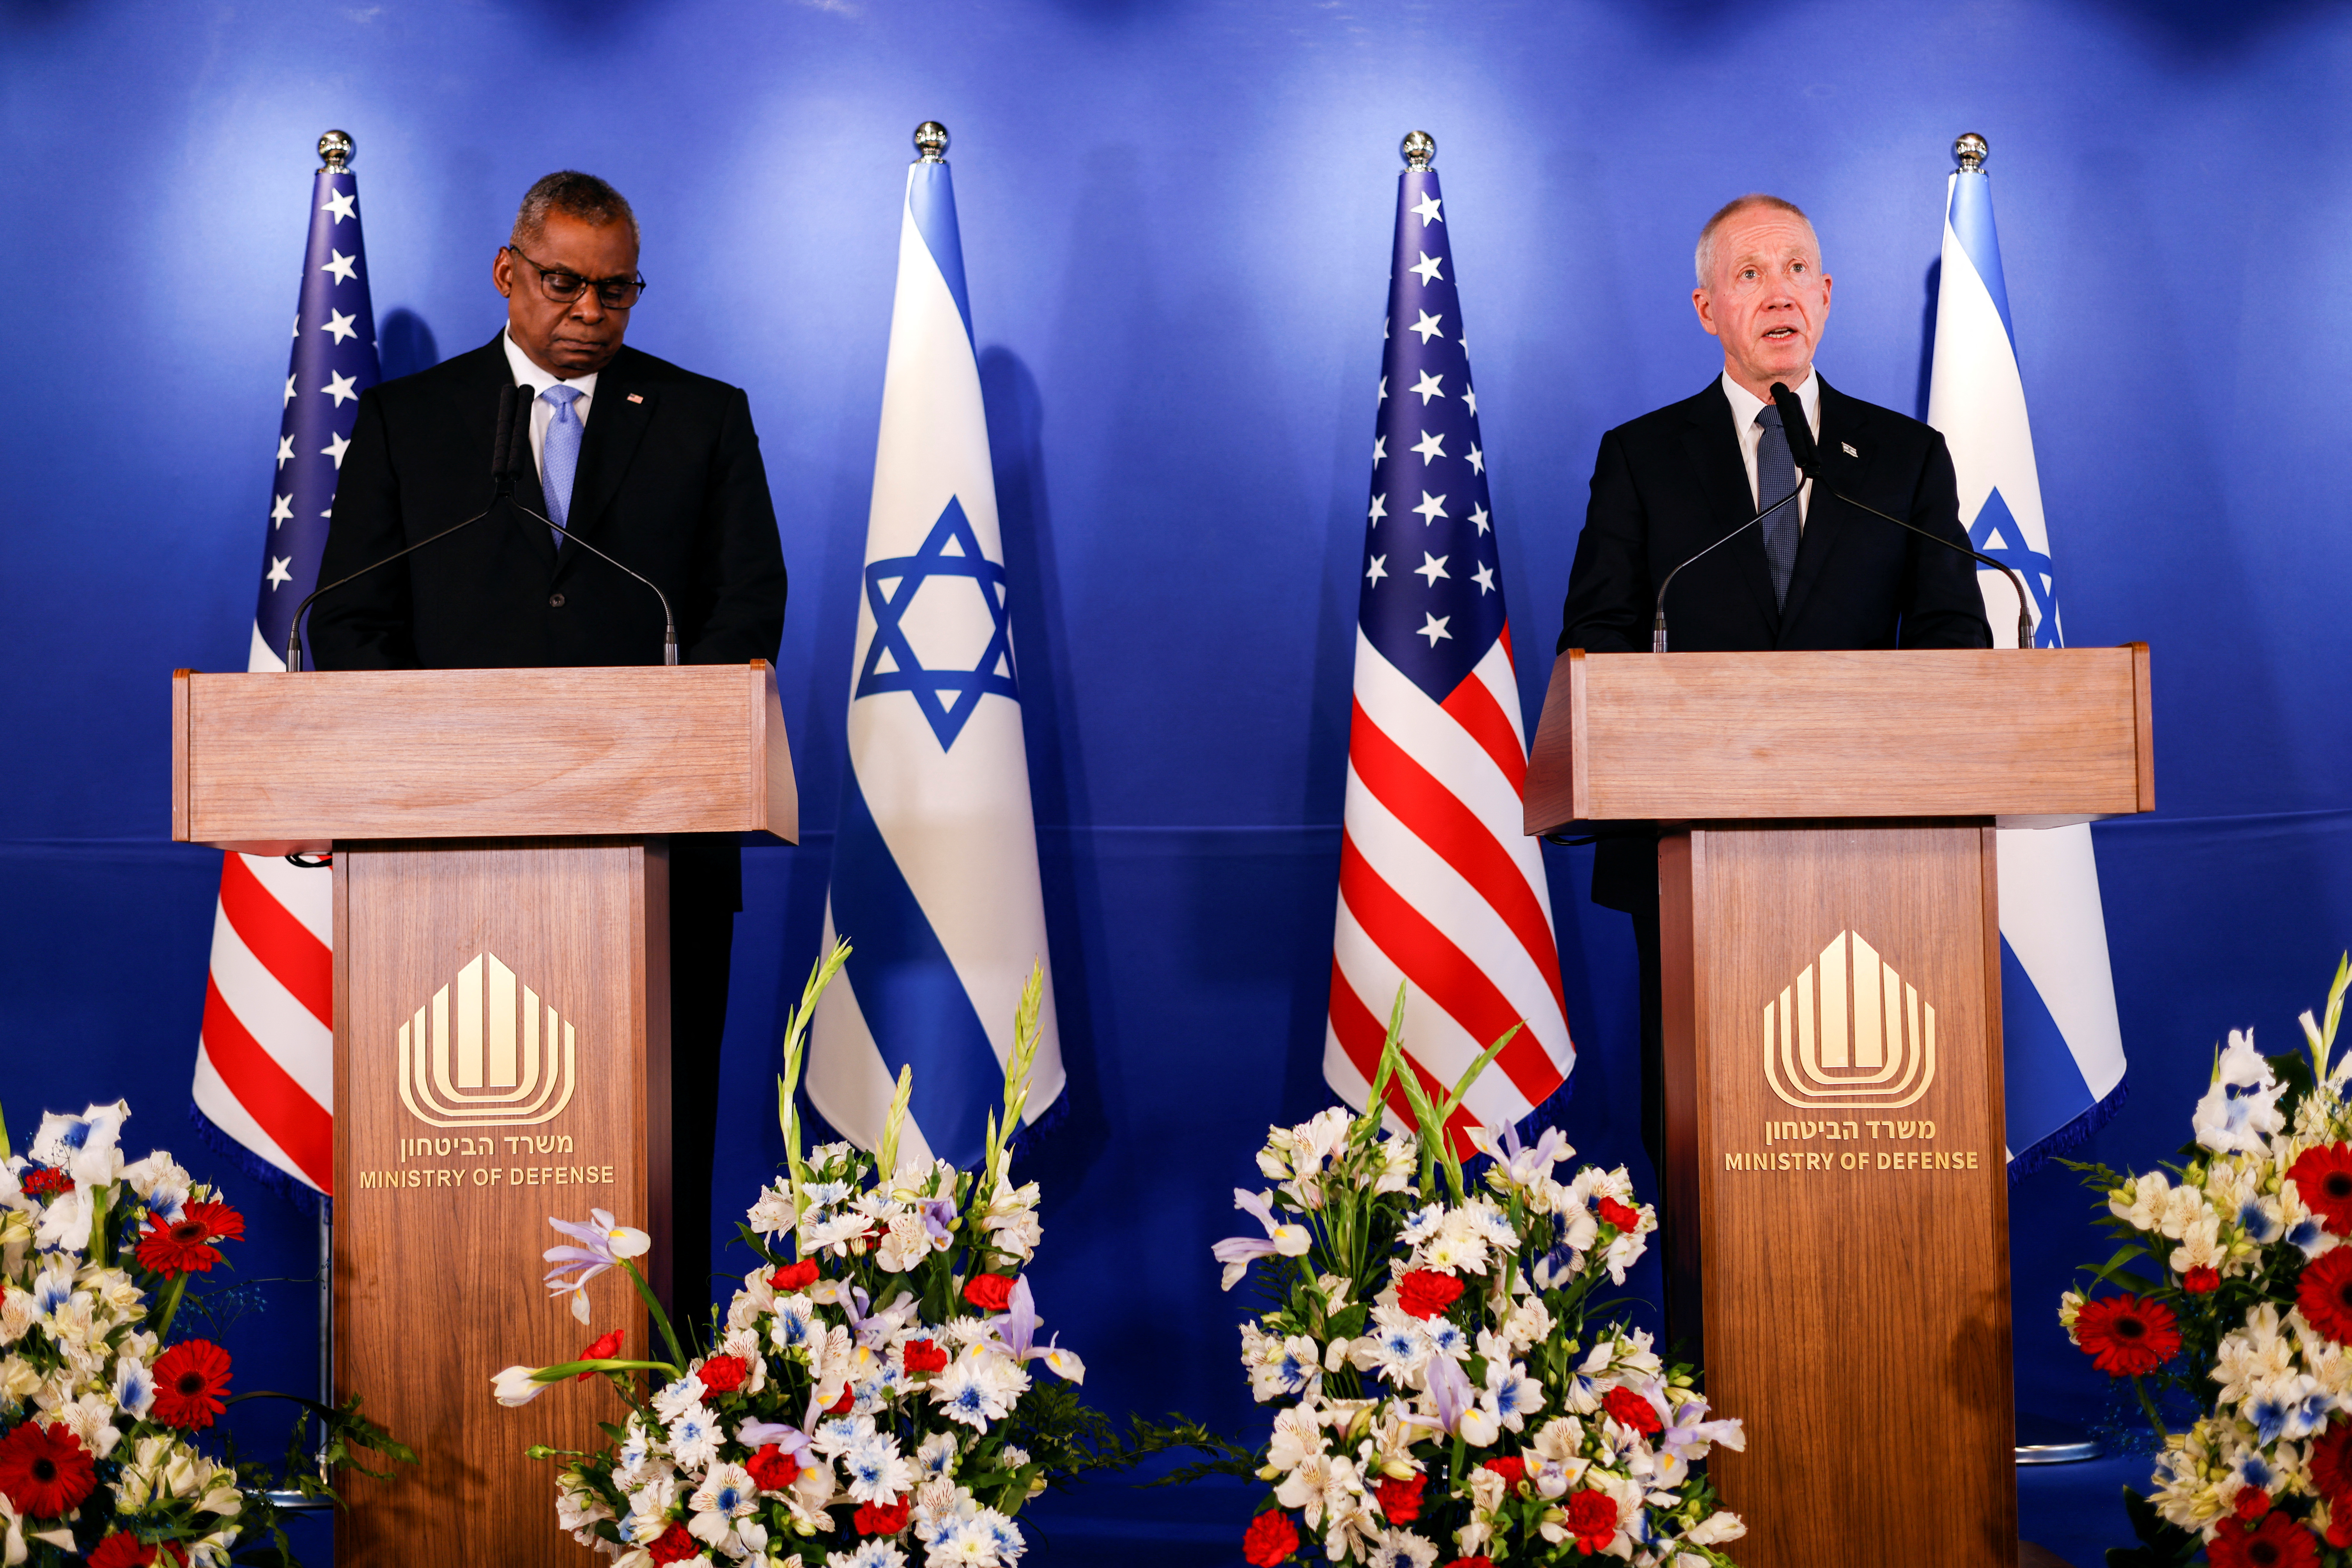 U.S. Secretary of Defense Lloyd Austin and his Israeli counterpart, Defence Minister Yoav Gallant at a news conference at Ben Gurion airport in Lod